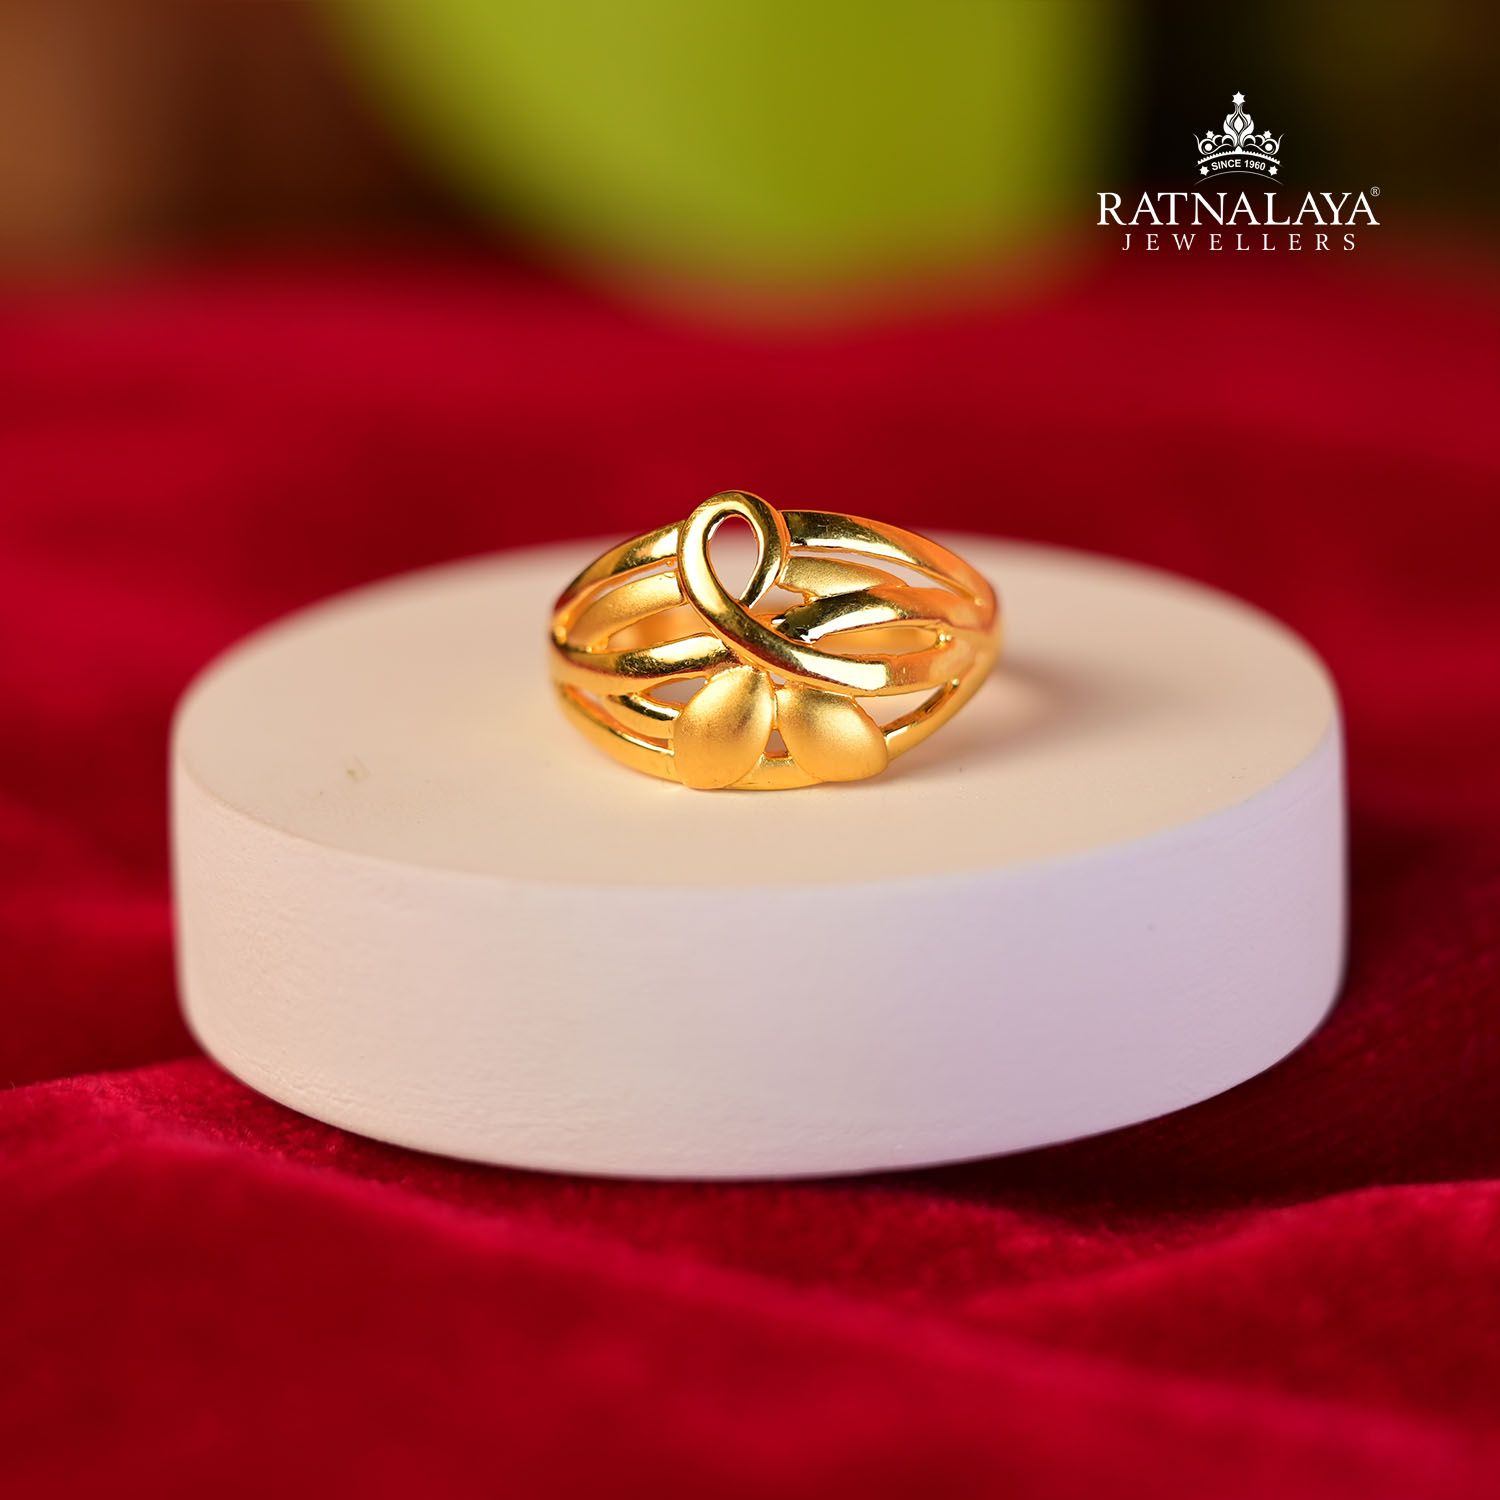 Buy quality 22kt 916 Yellow Gold Ladies Ring Calcutti floral Design in  Ahmedabad